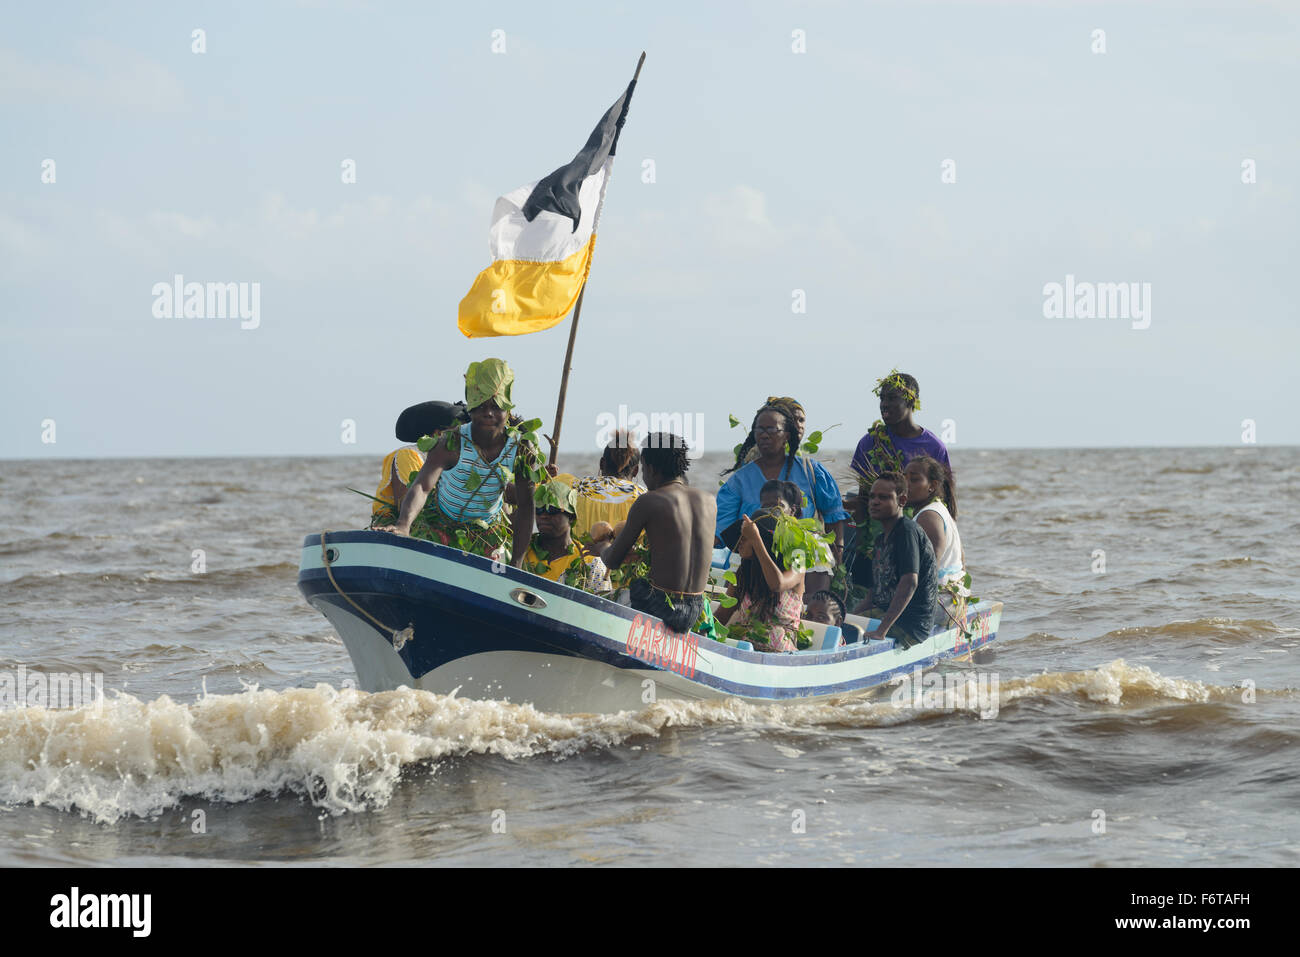 Hopkins Village, Belize, - November 19, 2015: The Garifuna people of Belize celebrate the landing of the first Garifuna people on the shores of Belize from Africa. This is a very important annual celebration for the Garifuna people and a time when they proudly show of their history and cultural heritage. Here they re-enact the first boat from Africa approaching the shores of Belize. Credit:  Roi Brooks/Alamy Live News Stock Photo